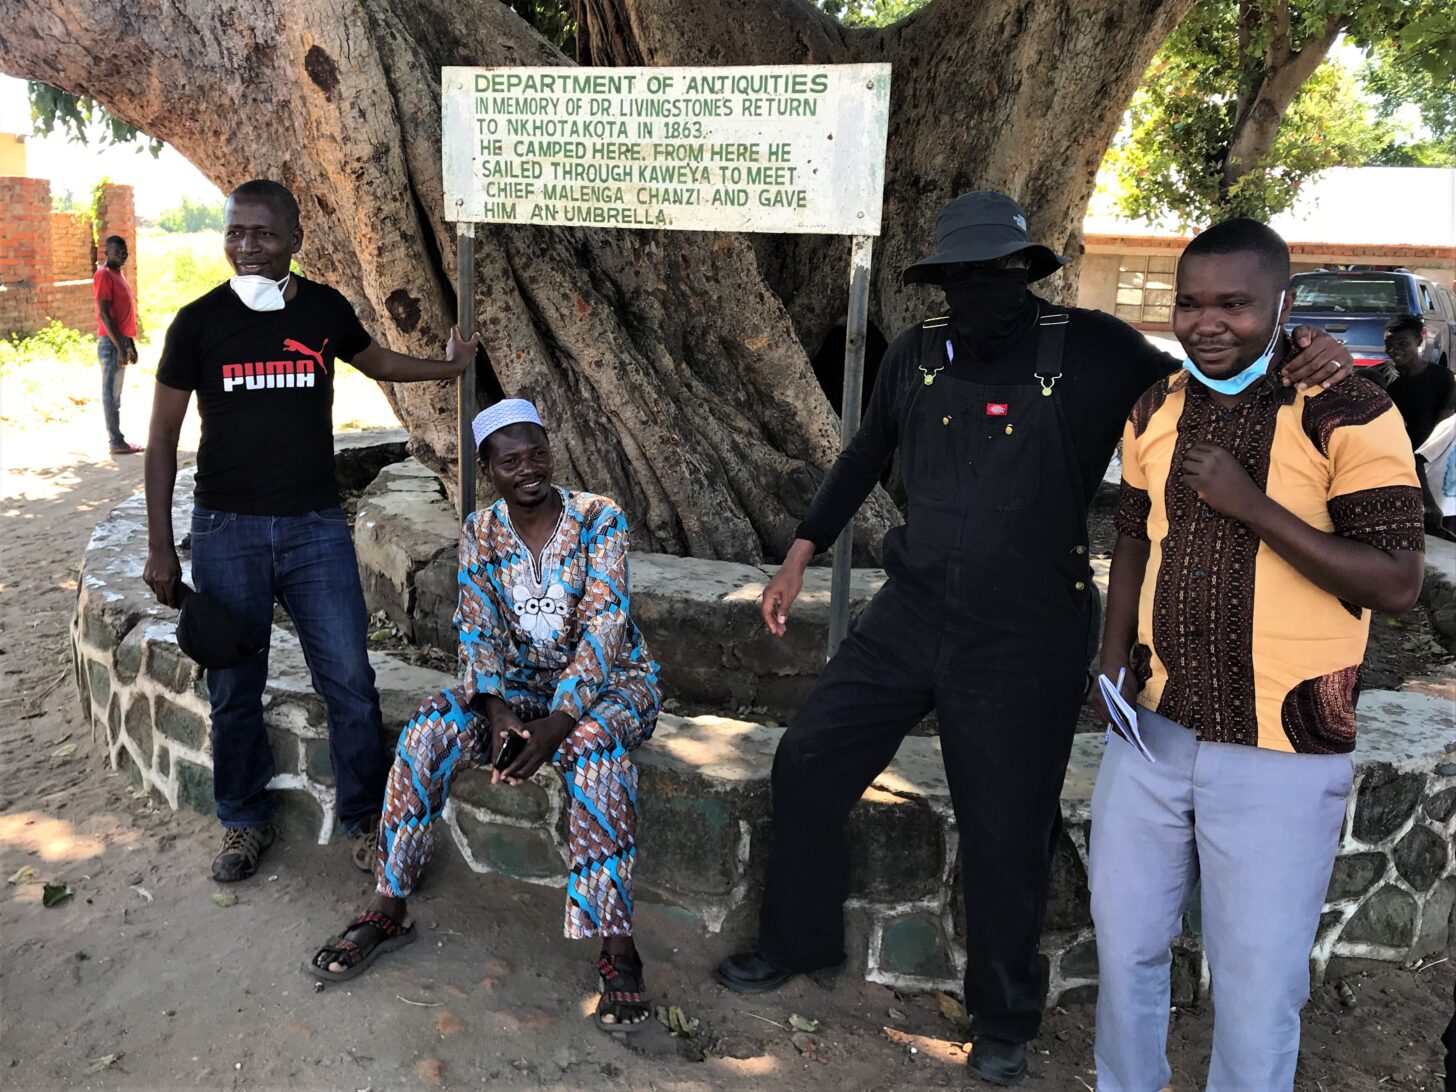 A group of people stand next to a sign. Sign reads Department of Antiquities: In memory of Dr. Livingston&squot;s return to Nkhotakota in 1863. He camped here. From here he sailed through Kaweya to meet Chief Malenga Chanzi and gave him an umbrella."